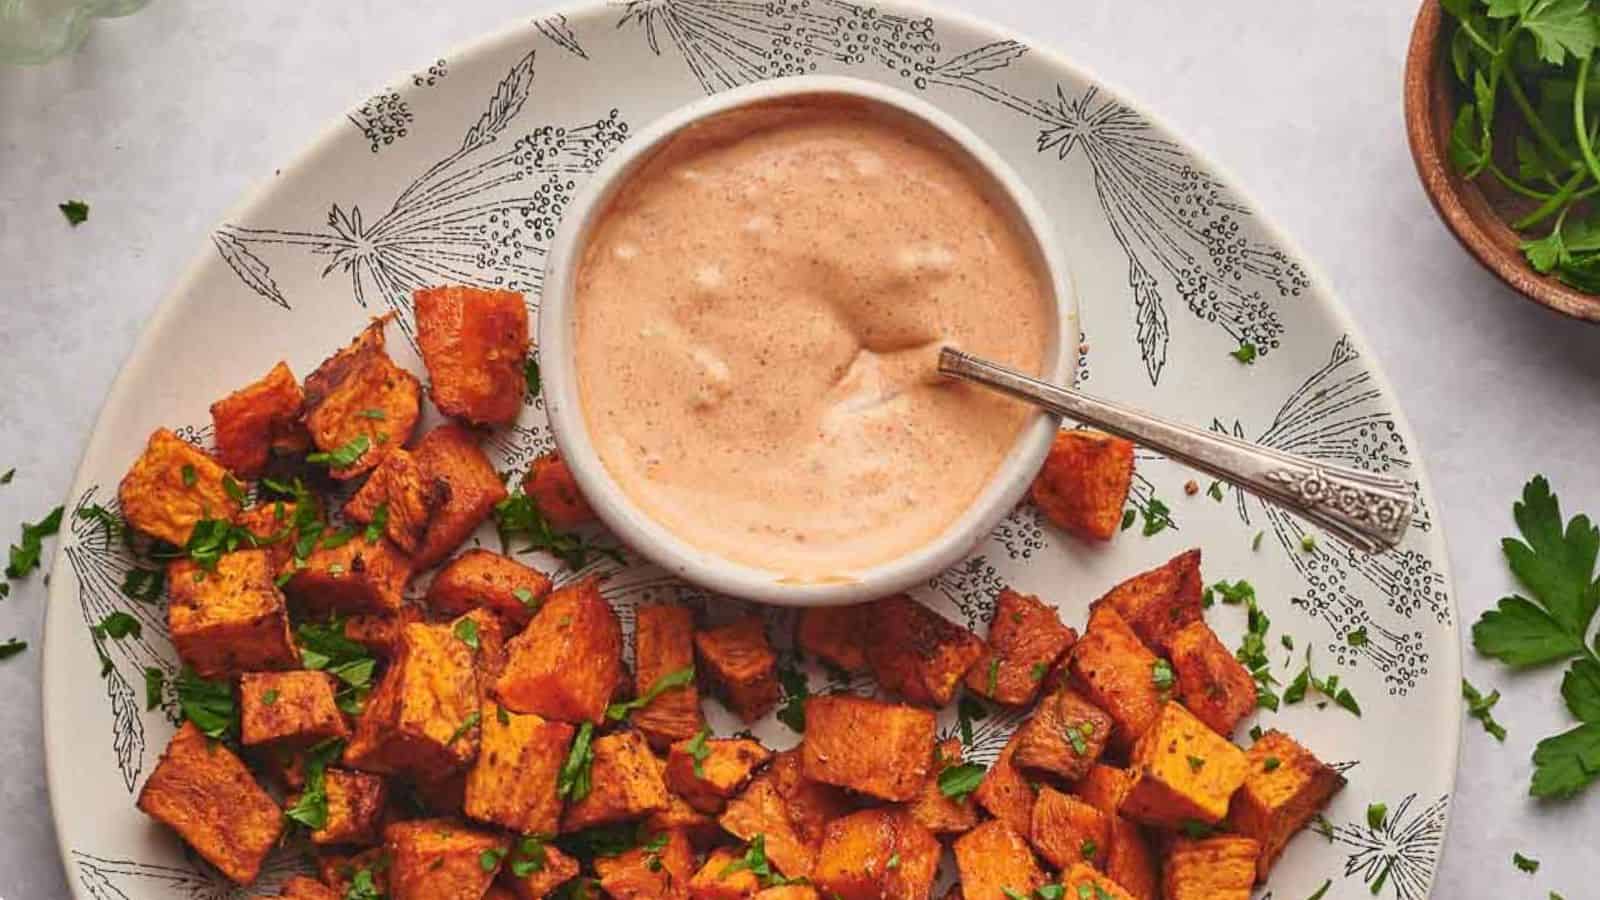 Dipping sauce in a small bowl surrounding by sweet potato cubes.